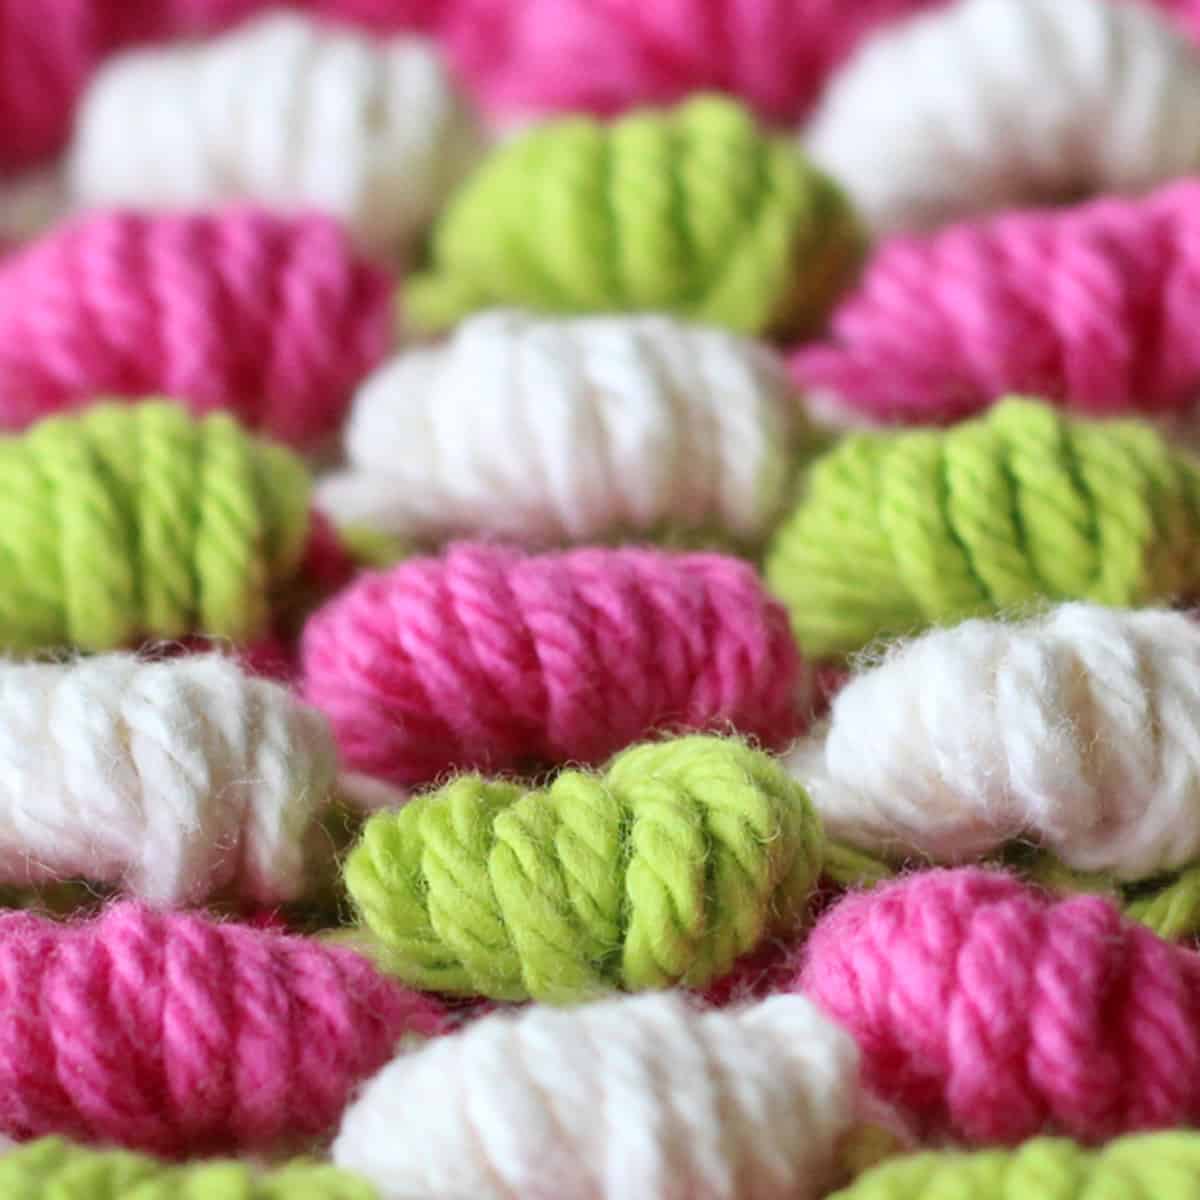 Spring Bobble Stitch Knitting Pattern texture in alternating green, pink, and white colors of yarn.